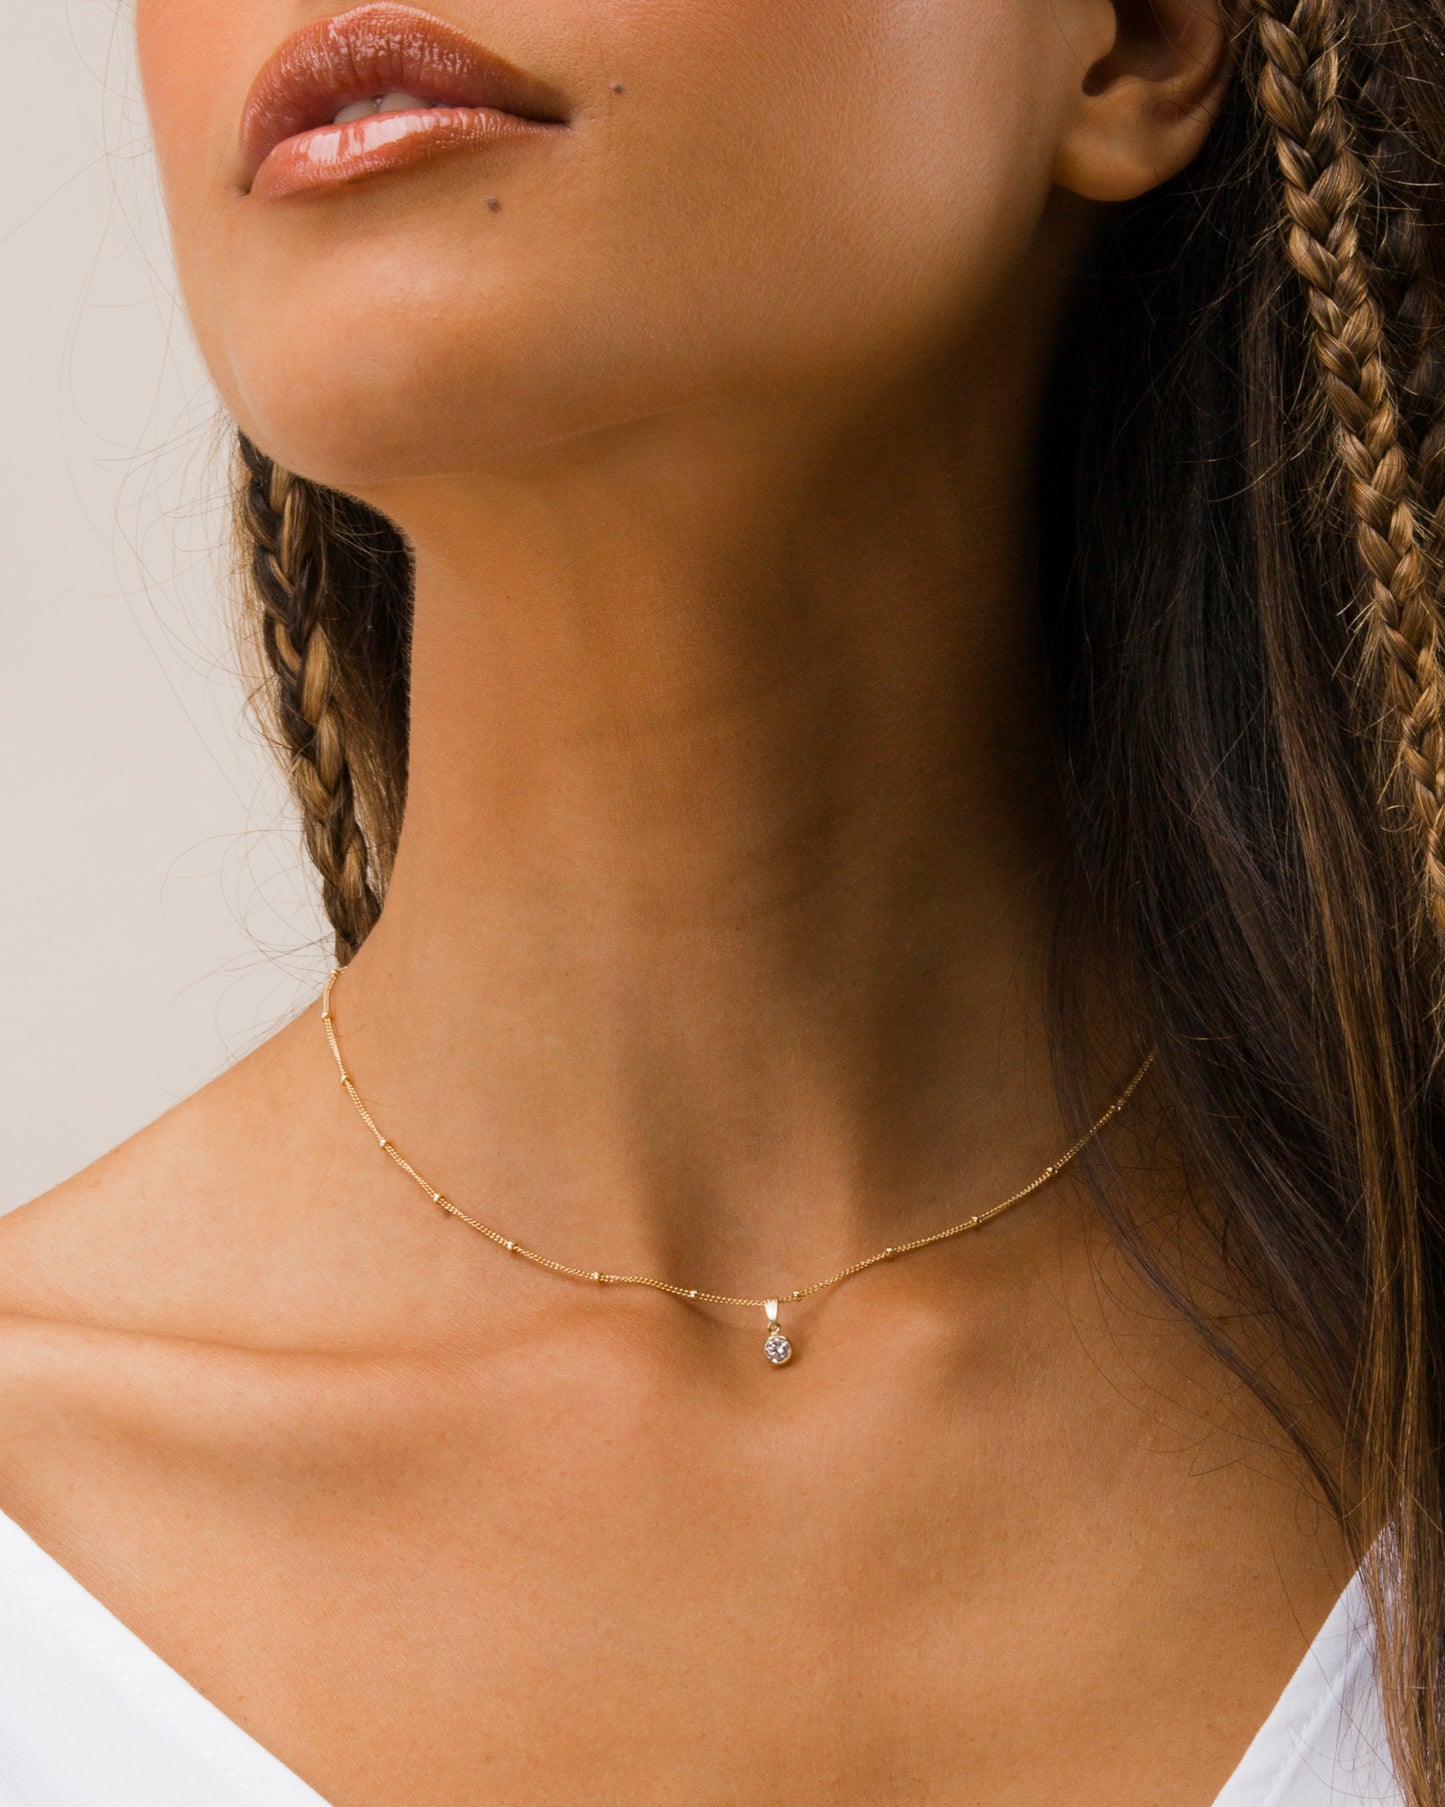 14K Gold Filled Cubic Zirconia Necklace | Inspiration Her Jewellery